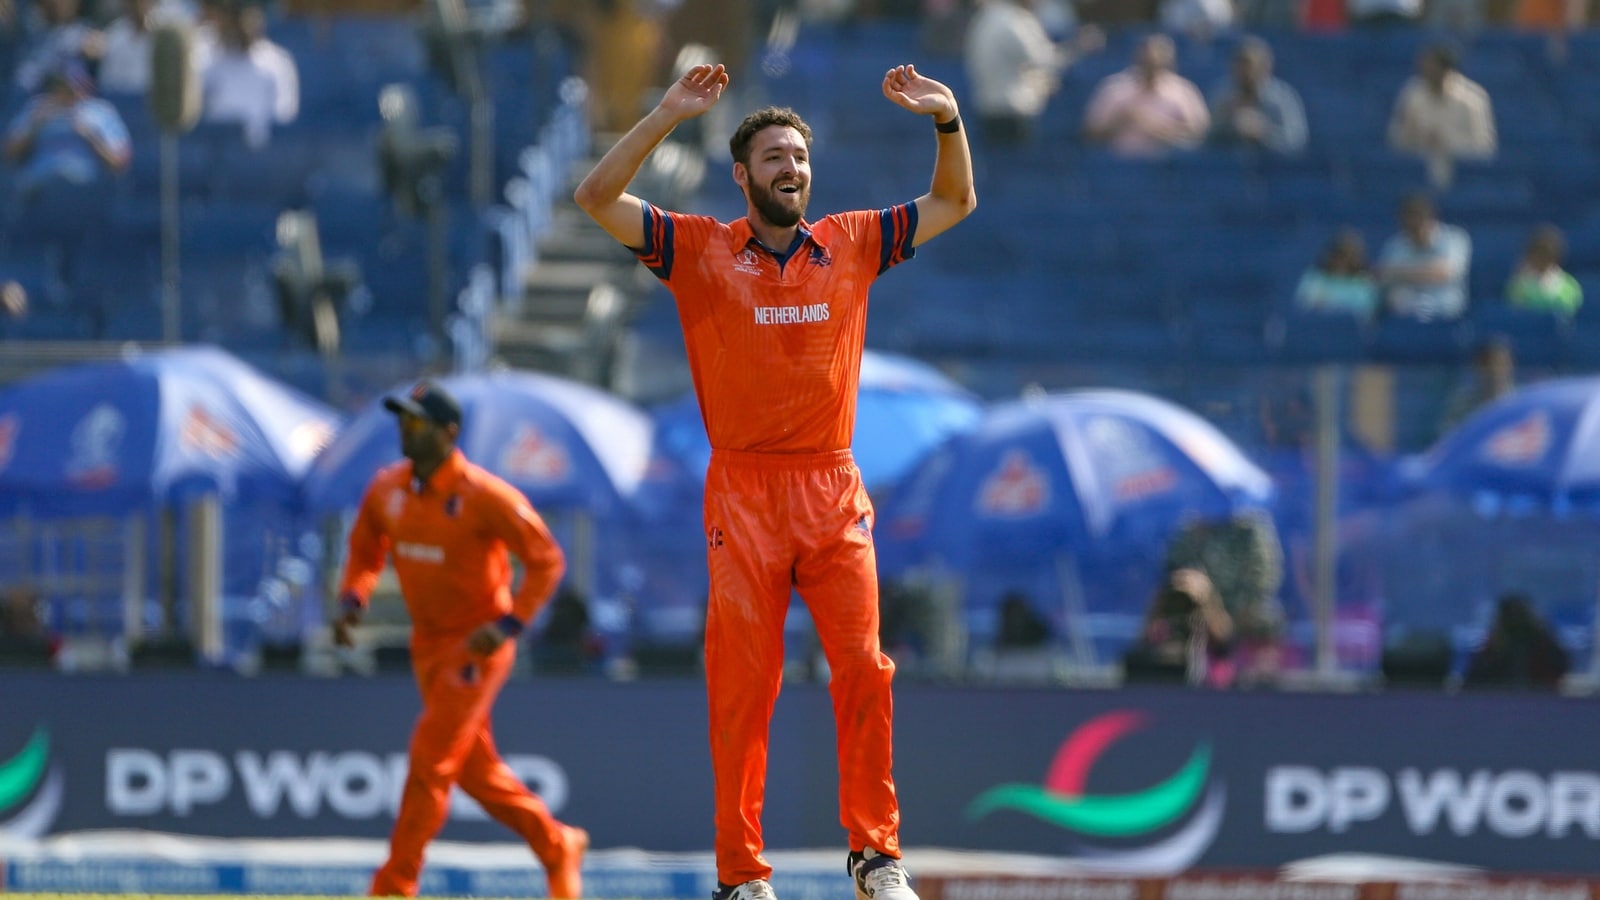 Zomato honours Netherlands cricketer Paul van Meekeren who worked for Uber Eats to brave winter months